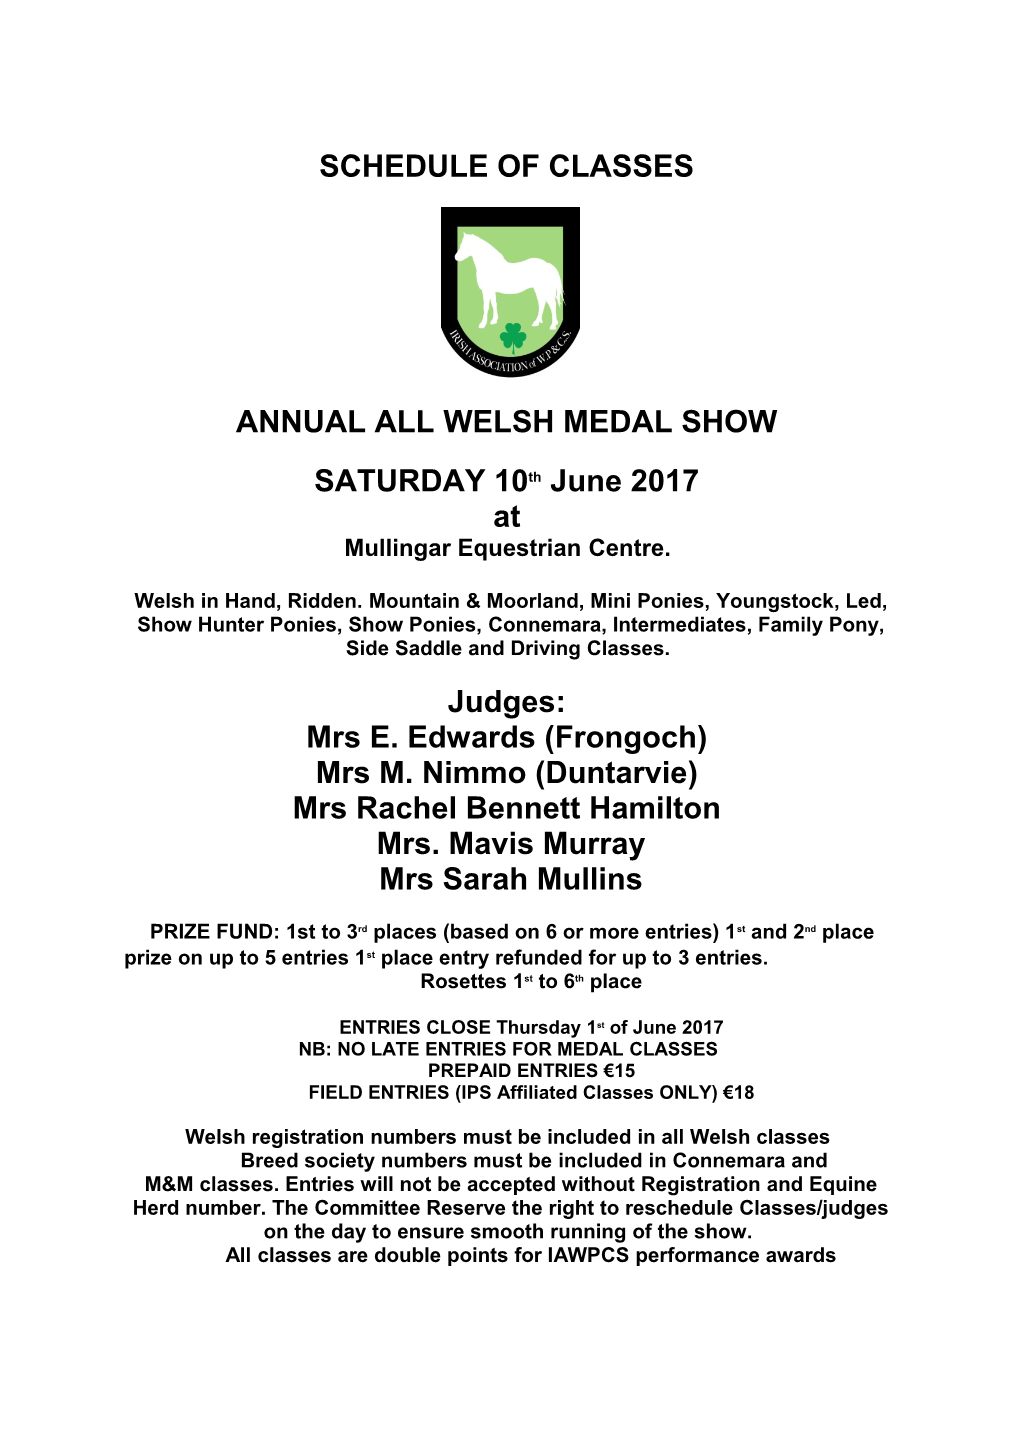 Annual Allwelsh Medal Show